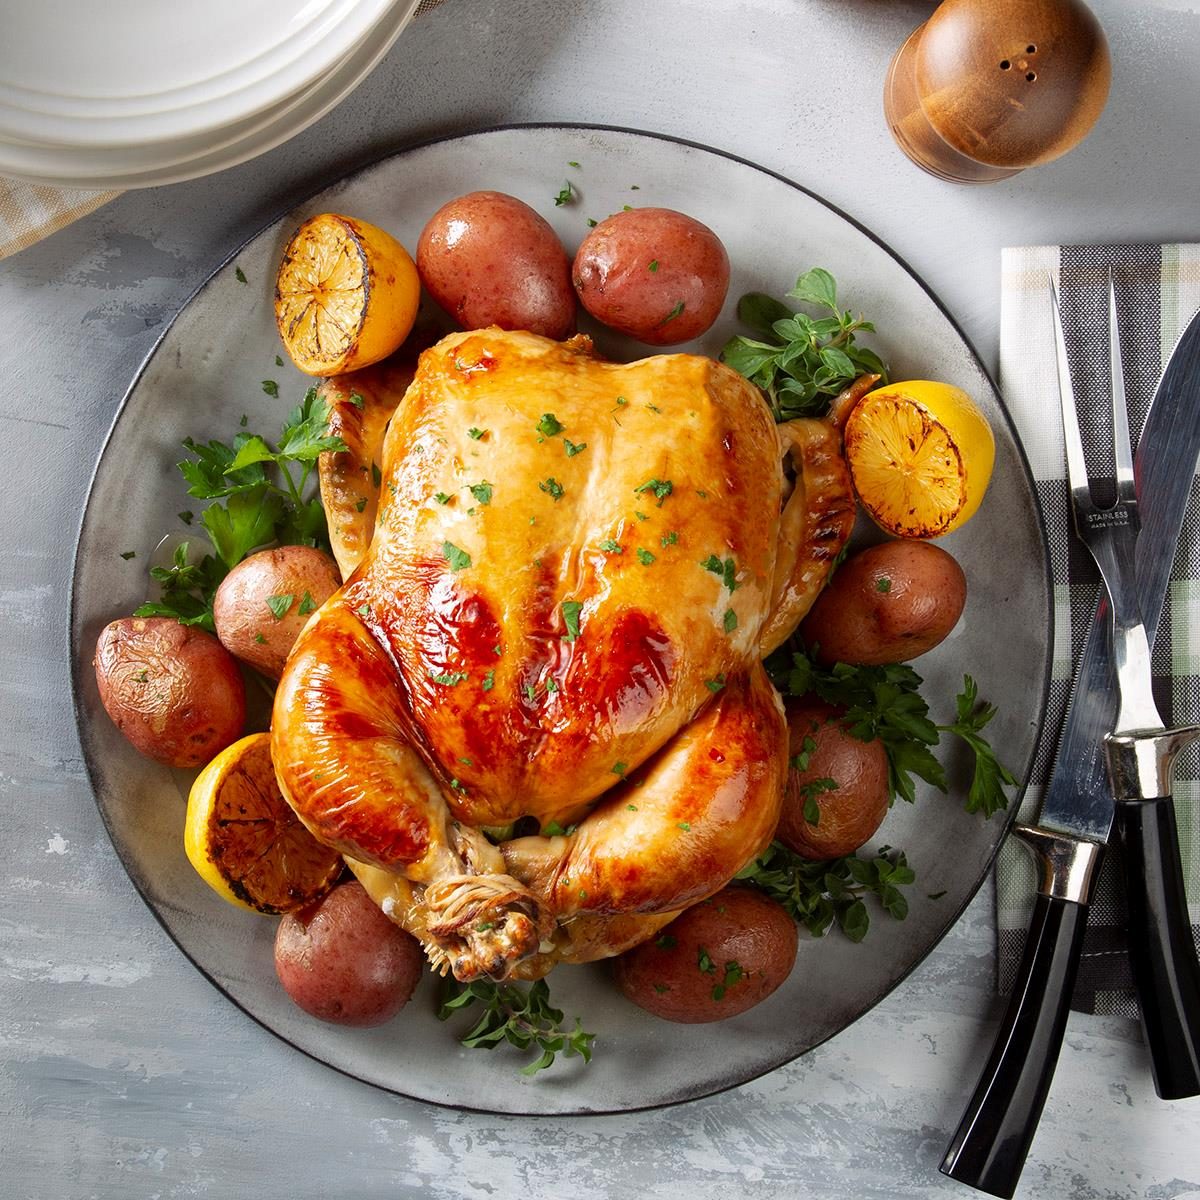 https://www.tasteofhome.com/wp-content/uploads/2018/01/Country-Roasted-Chicken_EXPS_FT20_17623_F_0130_1.jpg